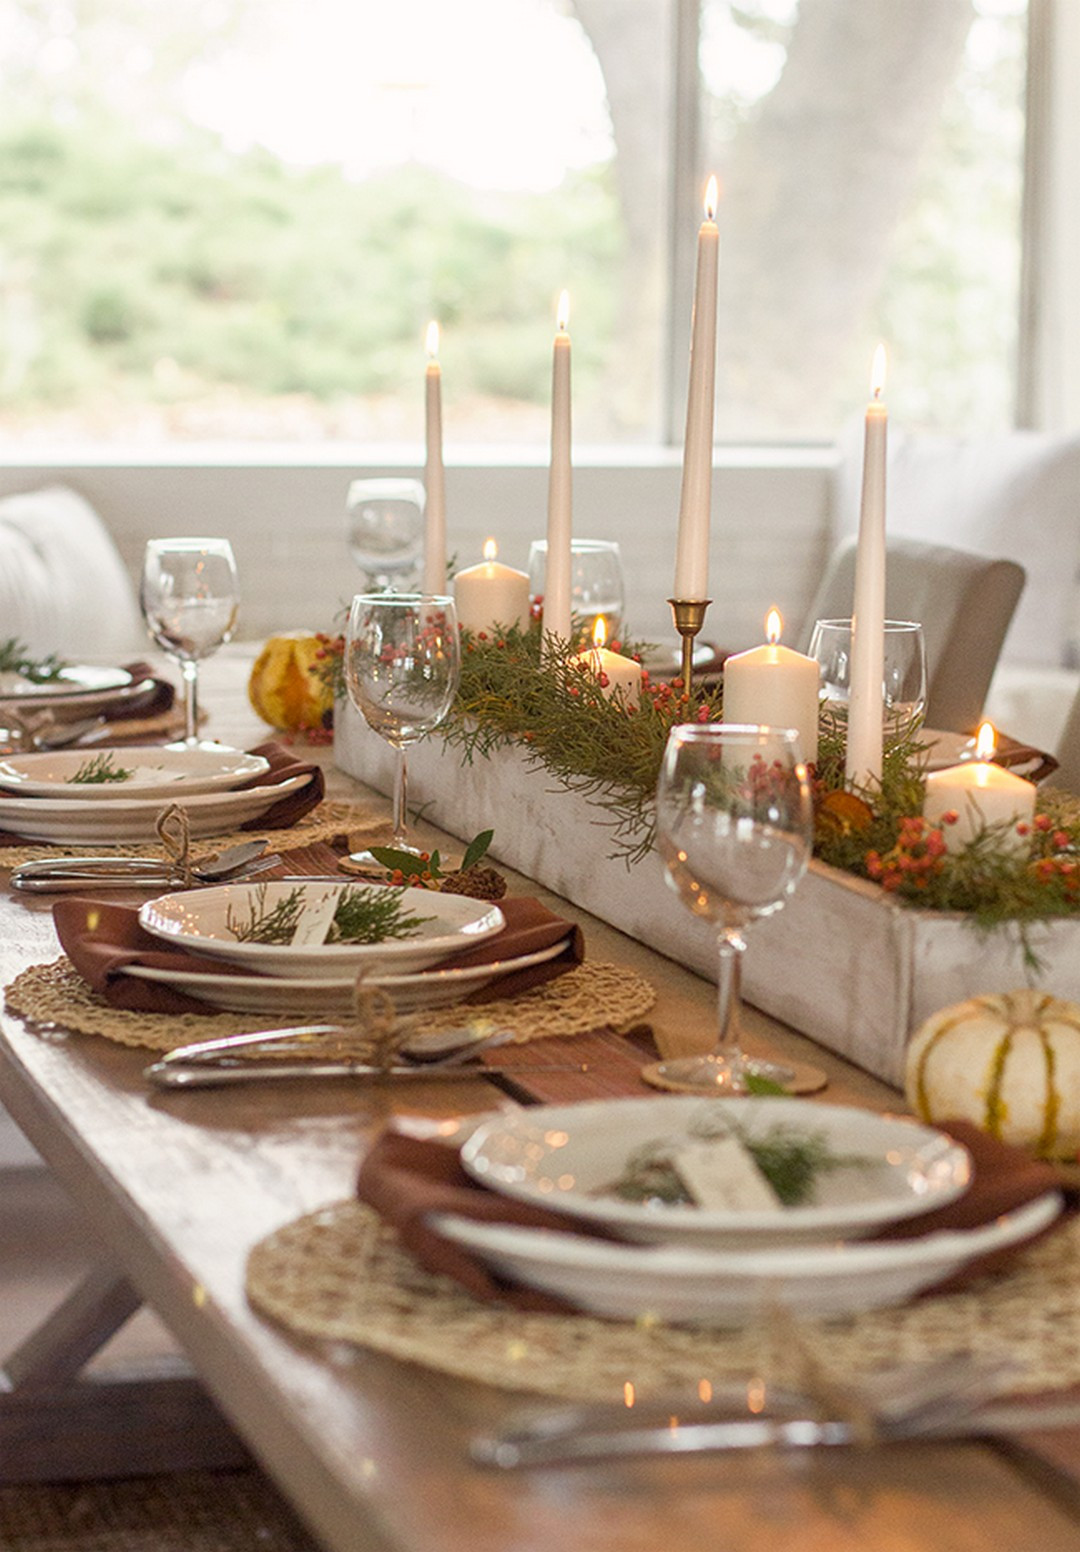 Thanksgiving Table Decor
 57 Beautiful Thanksgiving Centerpieces Table Settings